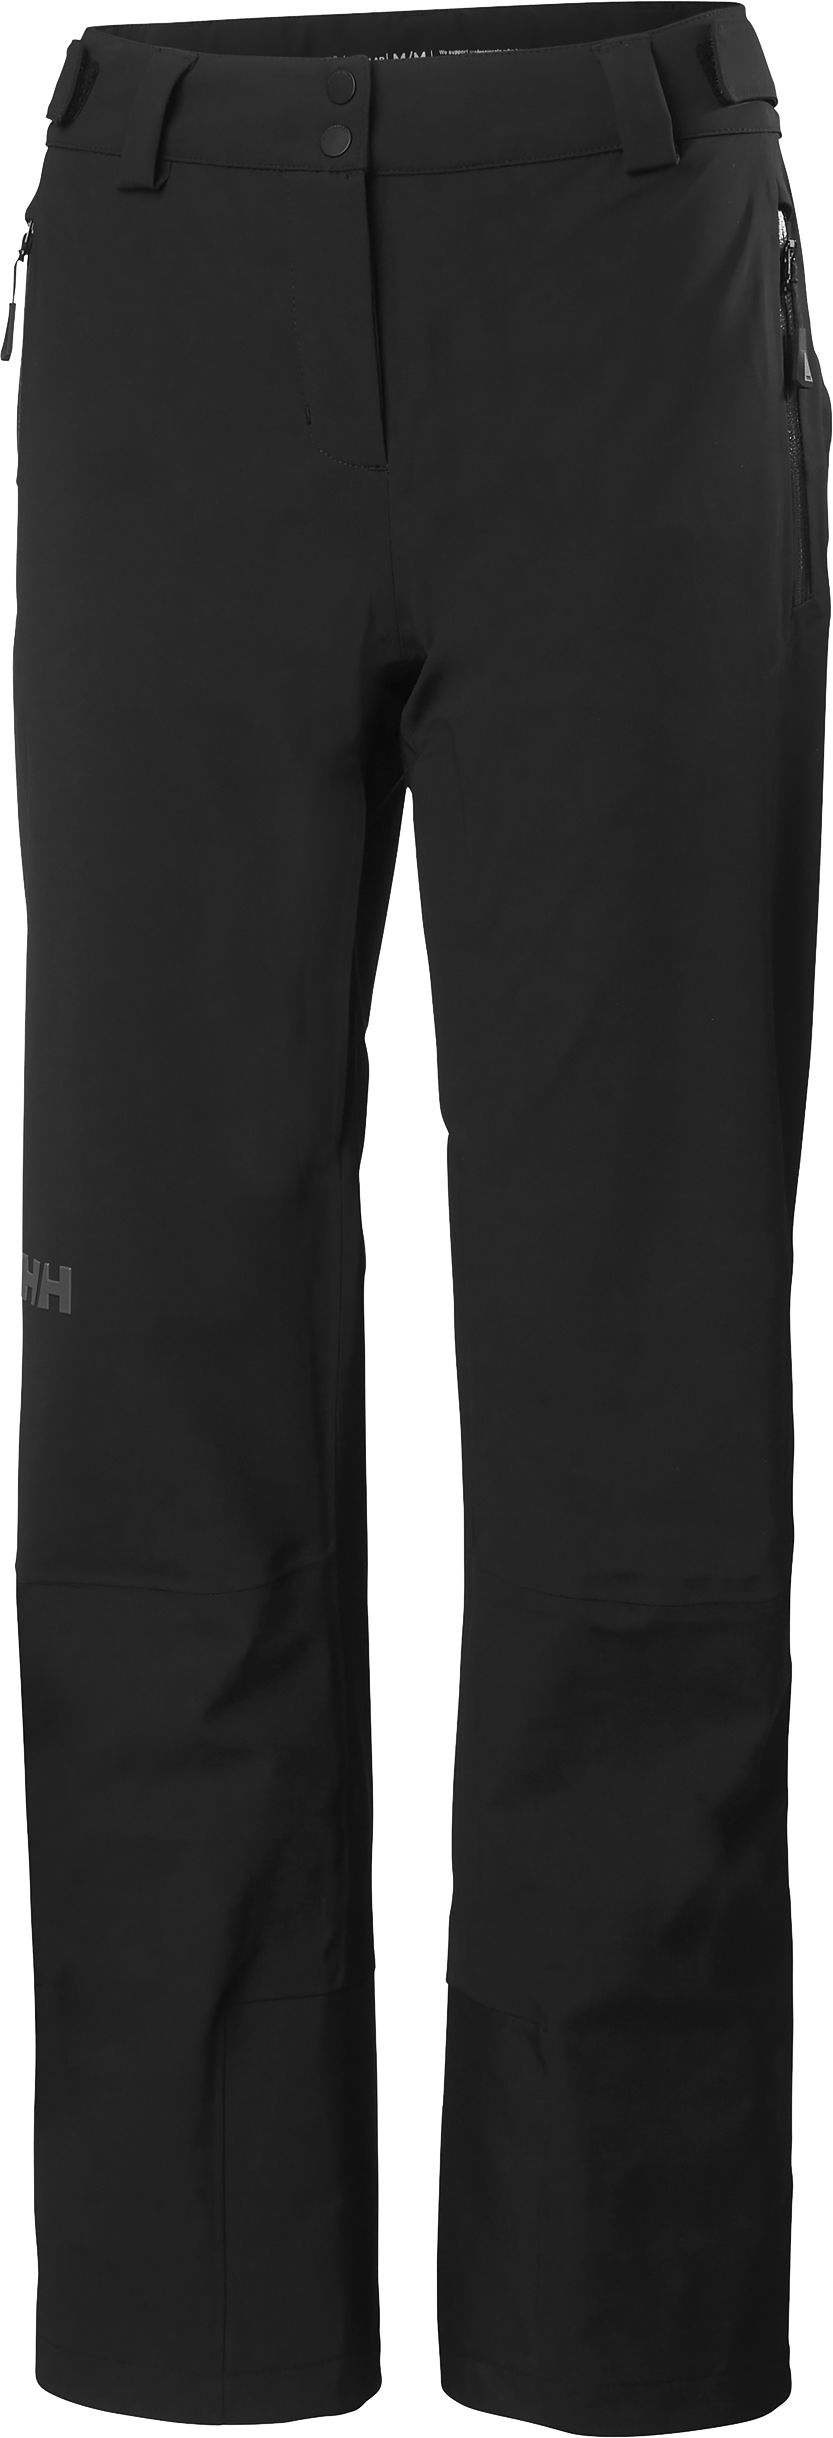 HELLY HANSEN, W MOTIONISTA 3L SHELL PANT